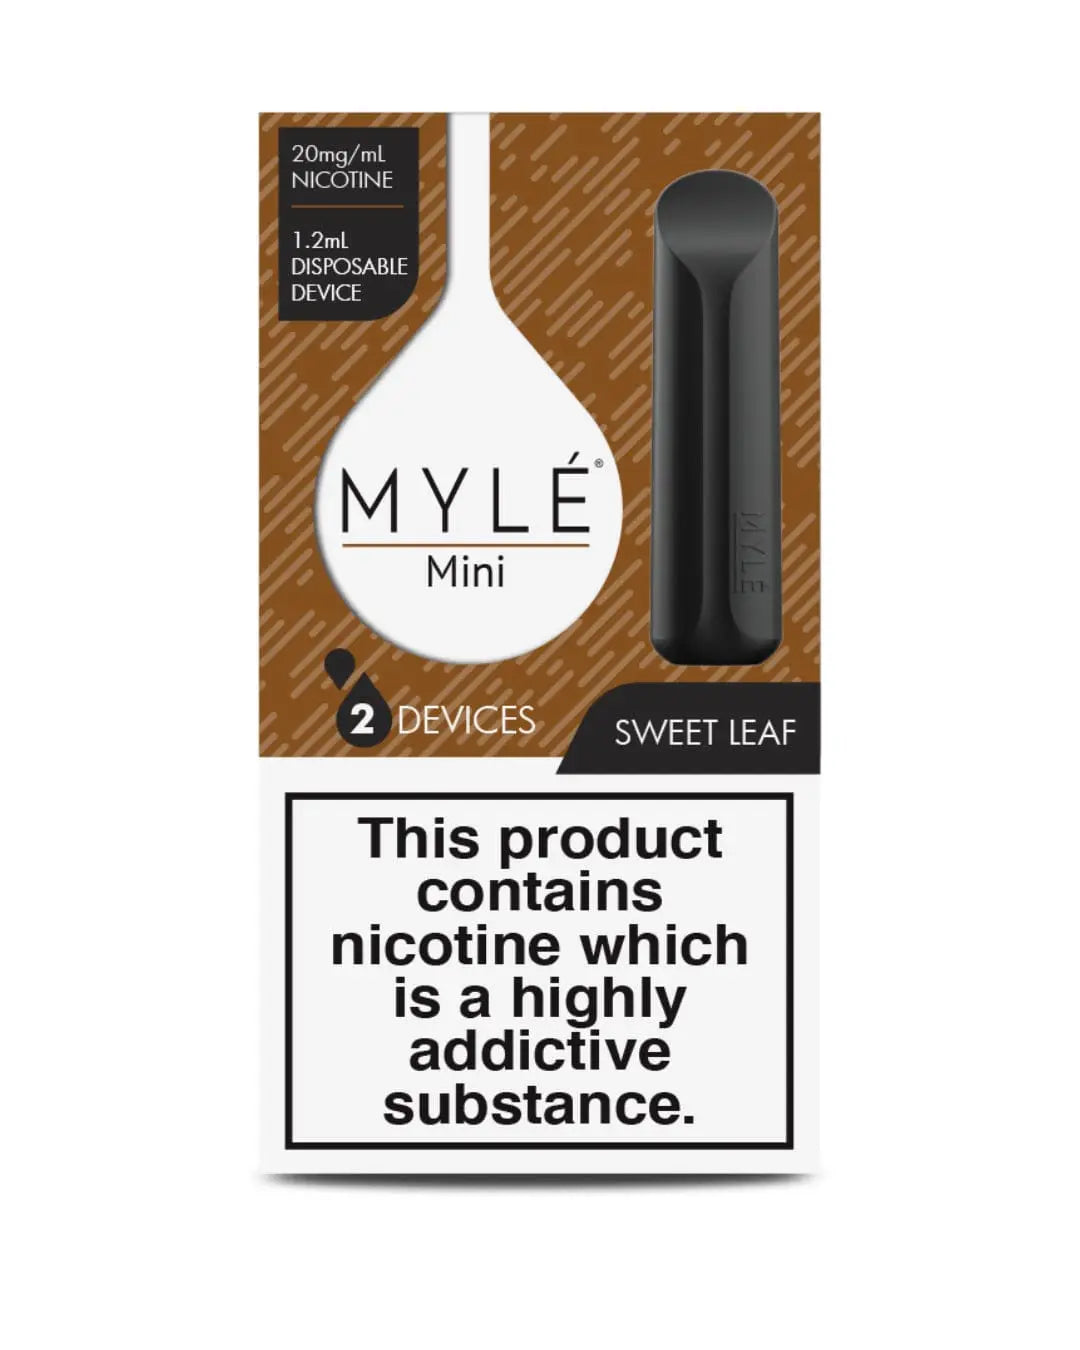 Sweet Leaf - Mini Myle - Pack of 2 Devices Disposable Vapes